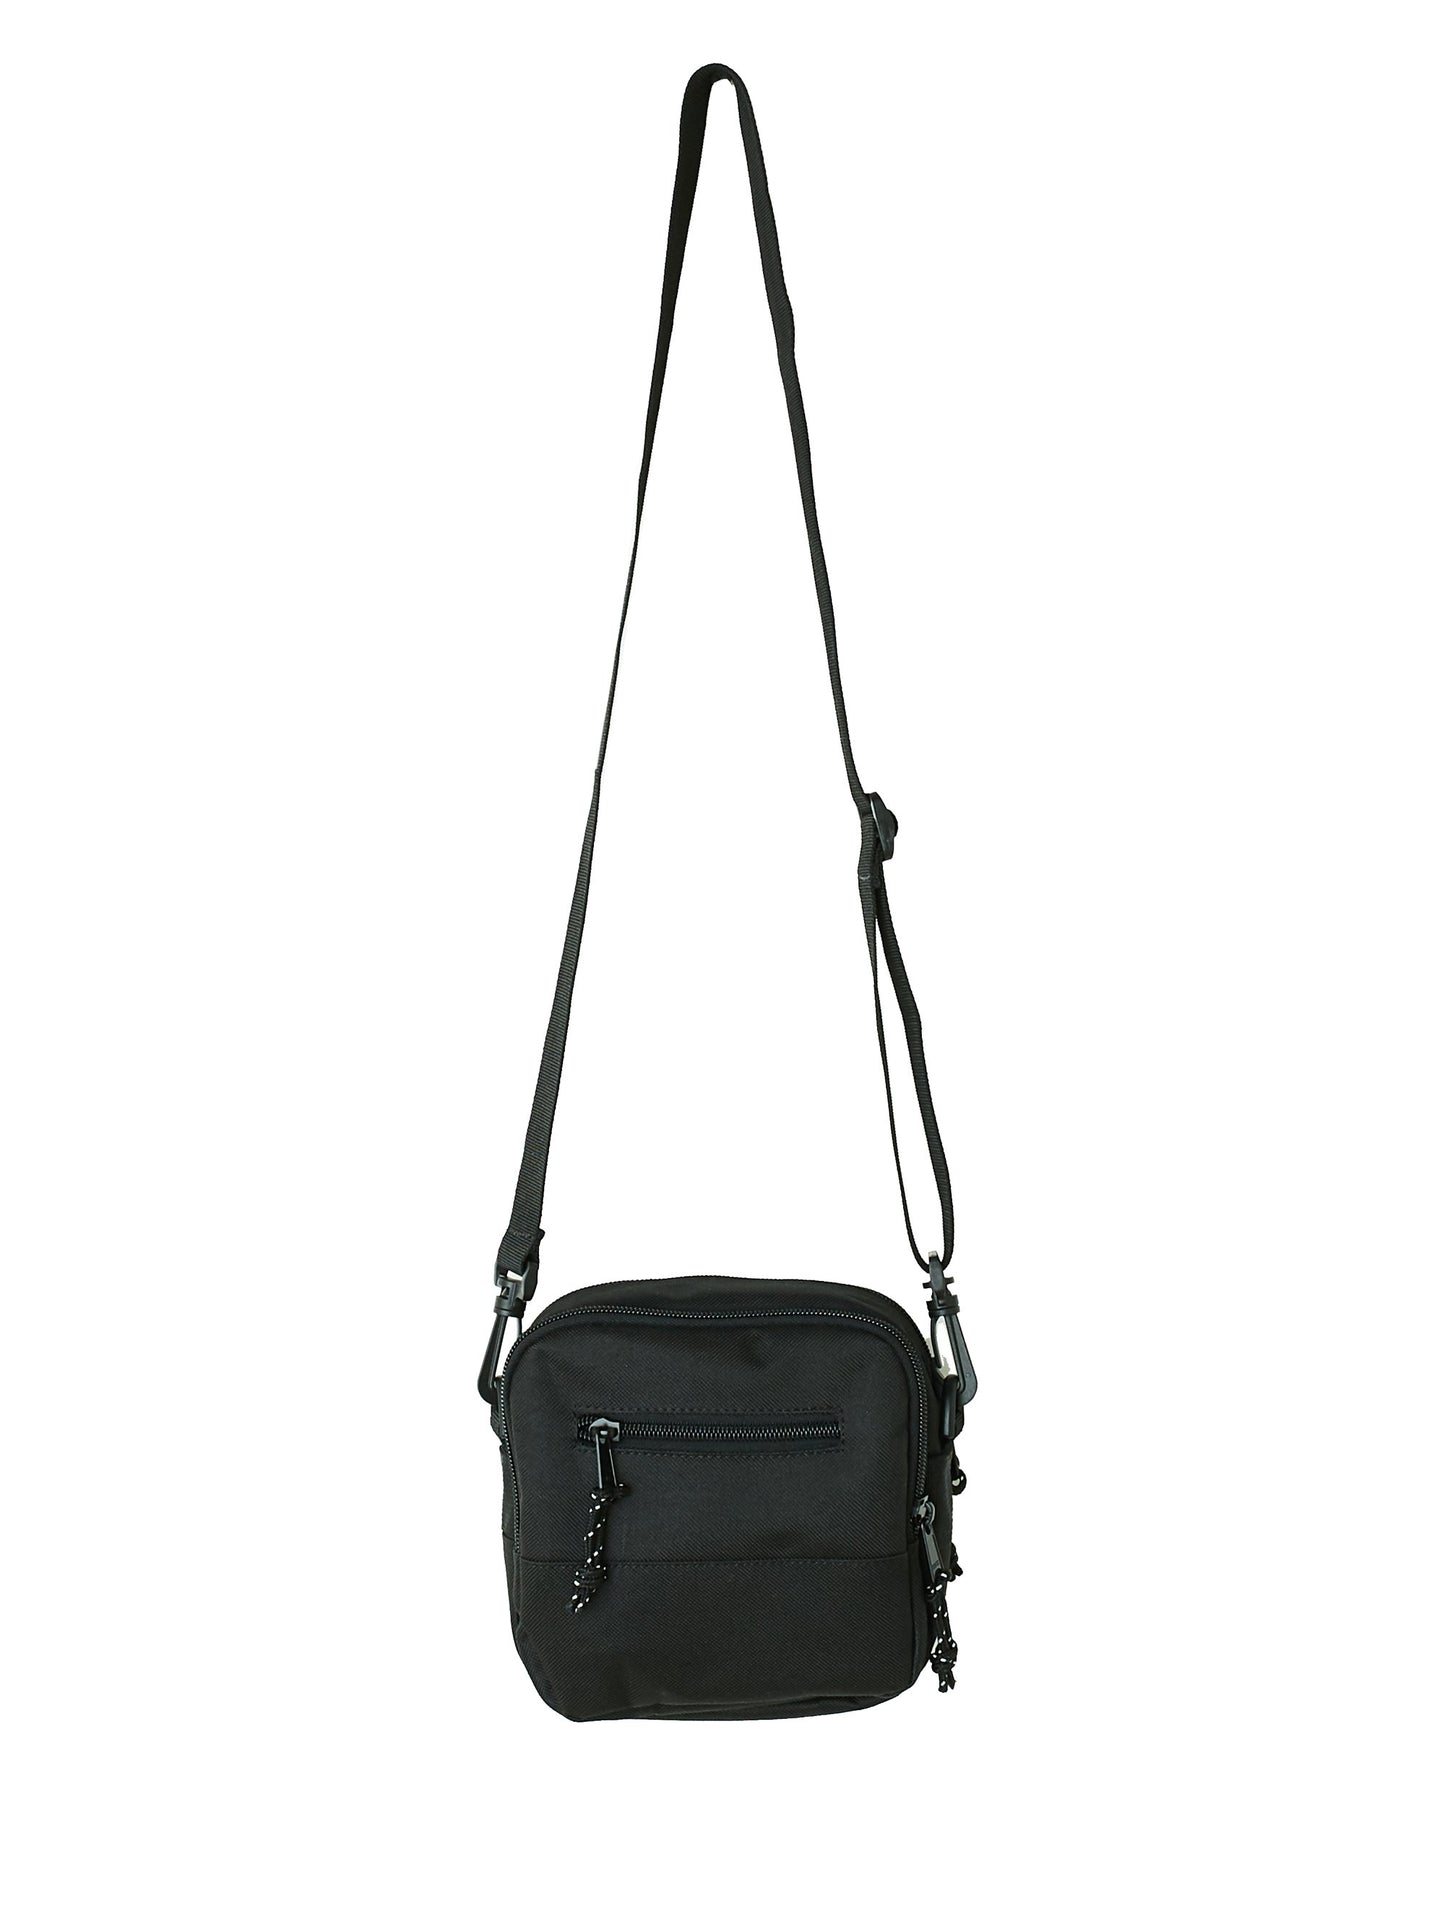 OBEY - Conditions Traveler Bag II, Black